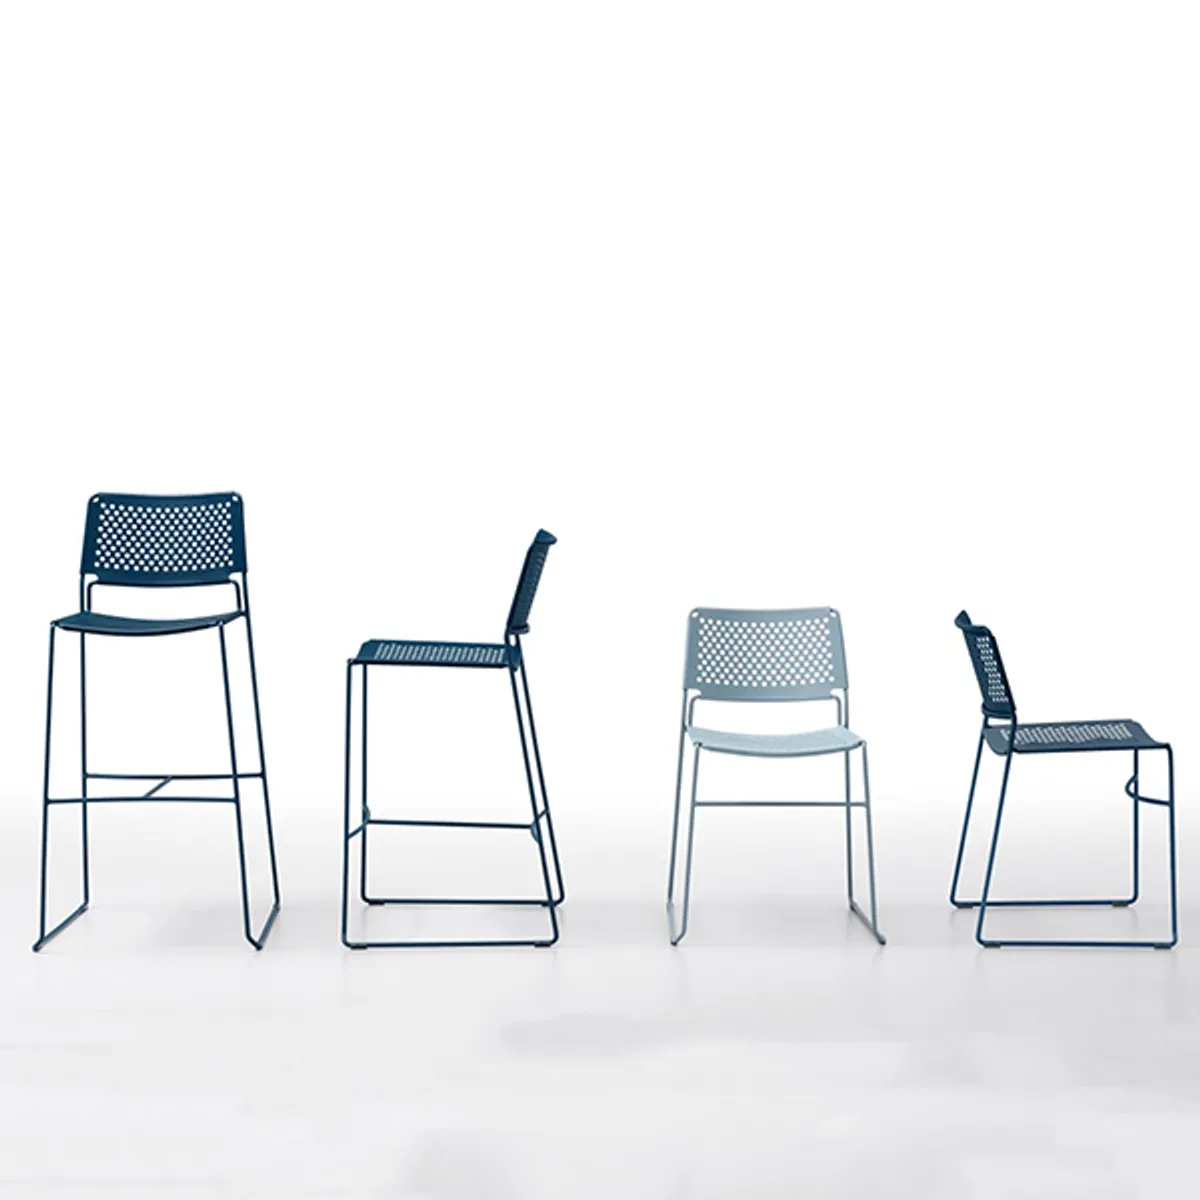 Honeycomb Steel Chair Collection Inside Out Contracts 014